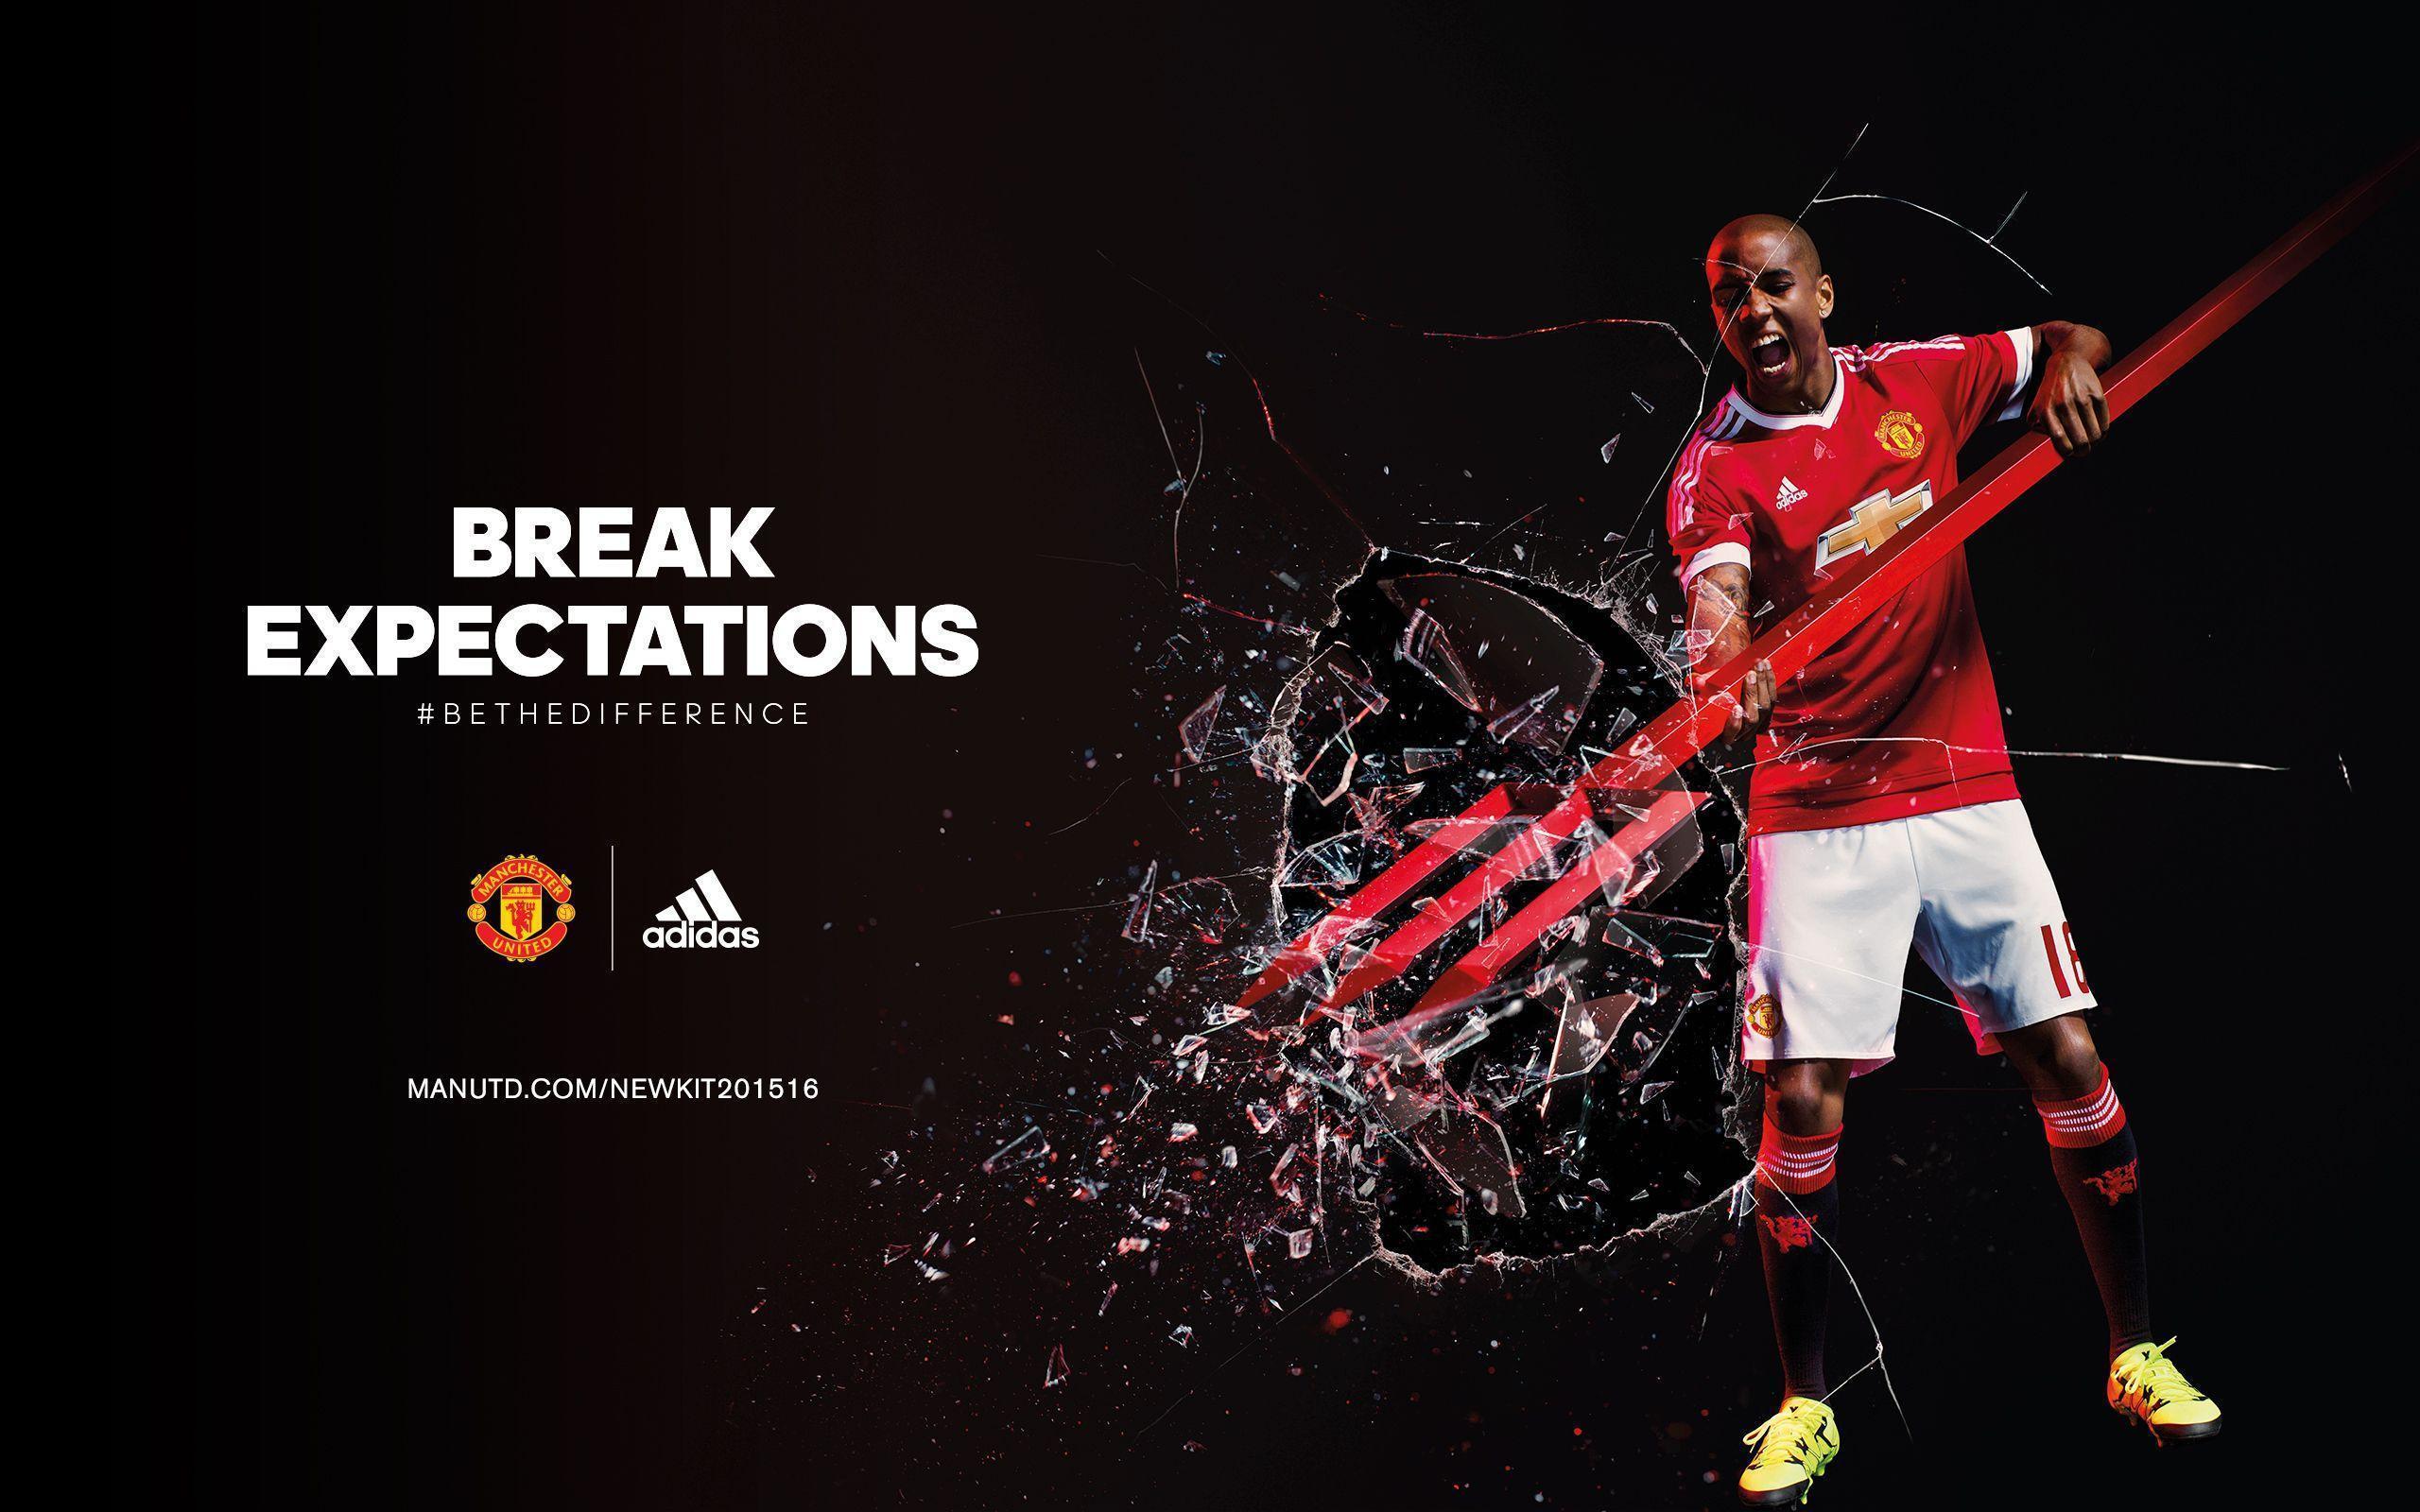 Manchester United new kit wallpaper: Ashley Young. Manchester